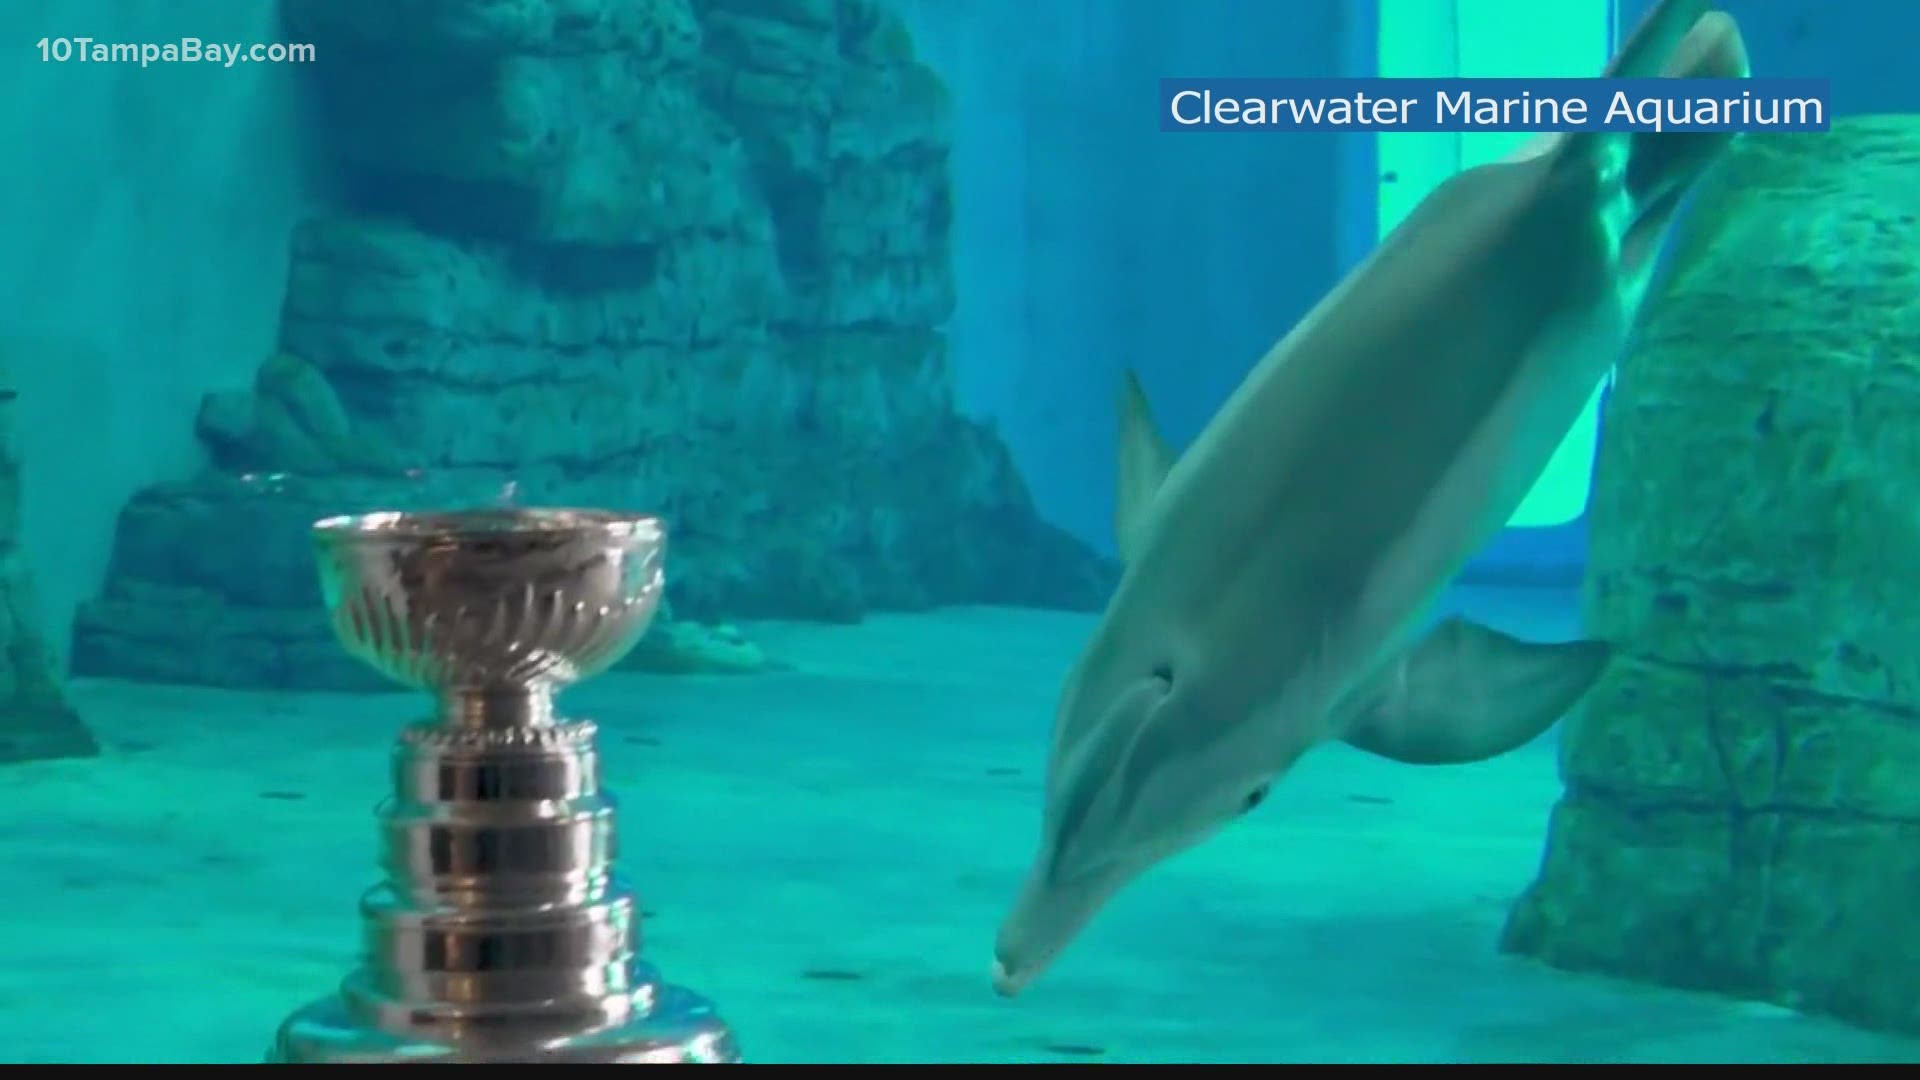 The Stanley Cup is making its rounds to Tampa Bay area attractions to celebrate the Lightning's championship win.